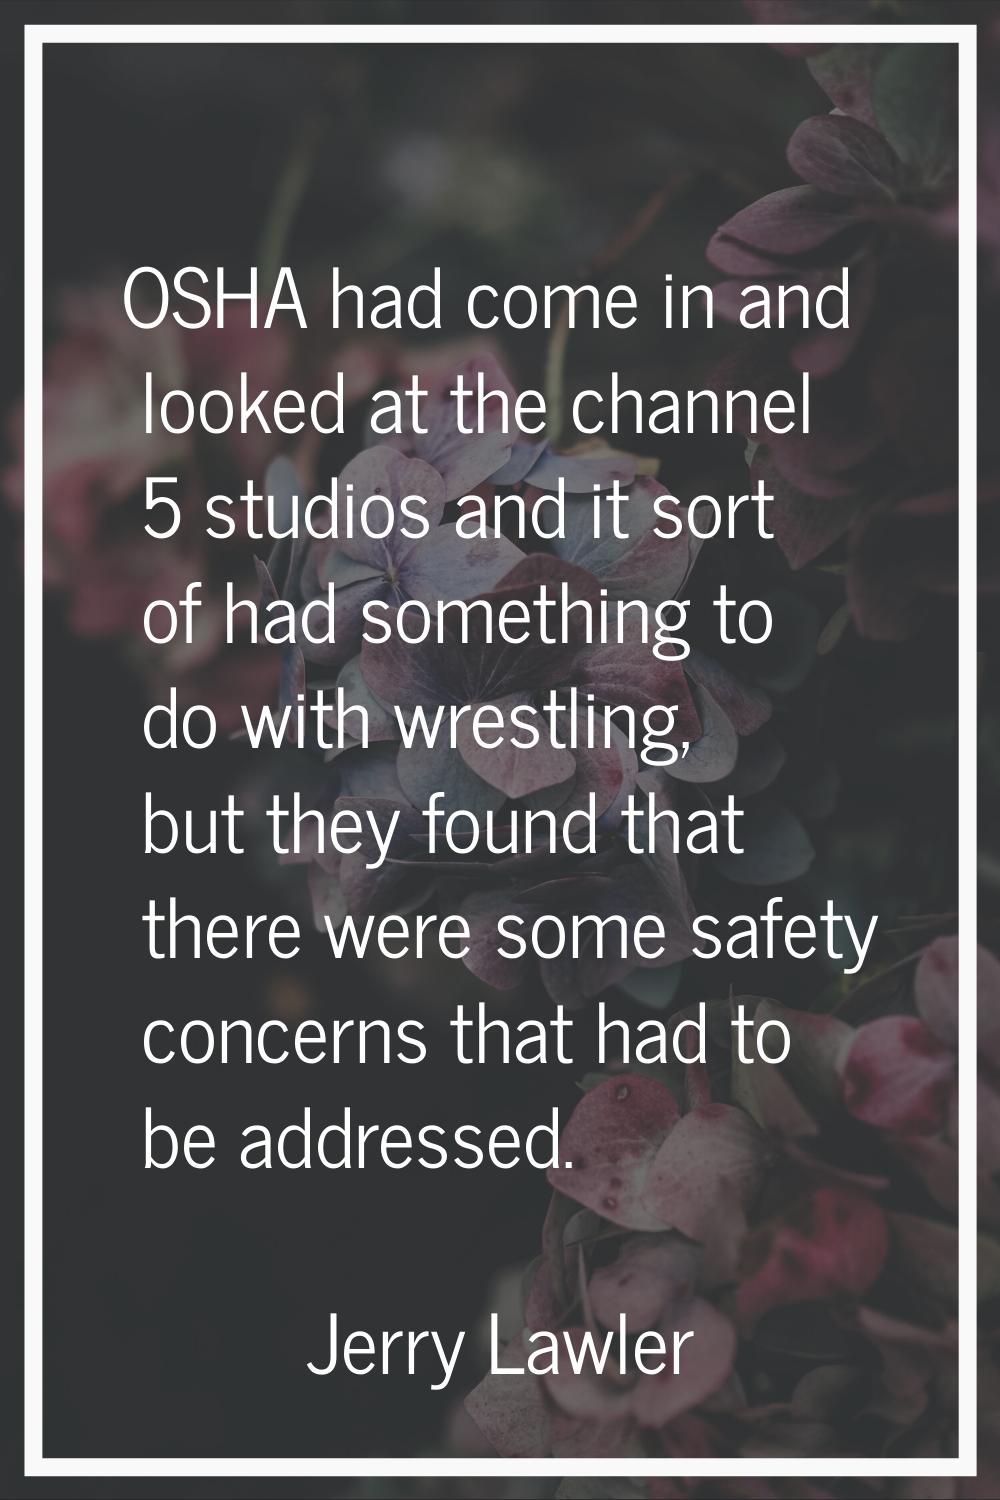 OSHA had come in and looked at the channel 5 studios and it sort of had something to do with wrestl